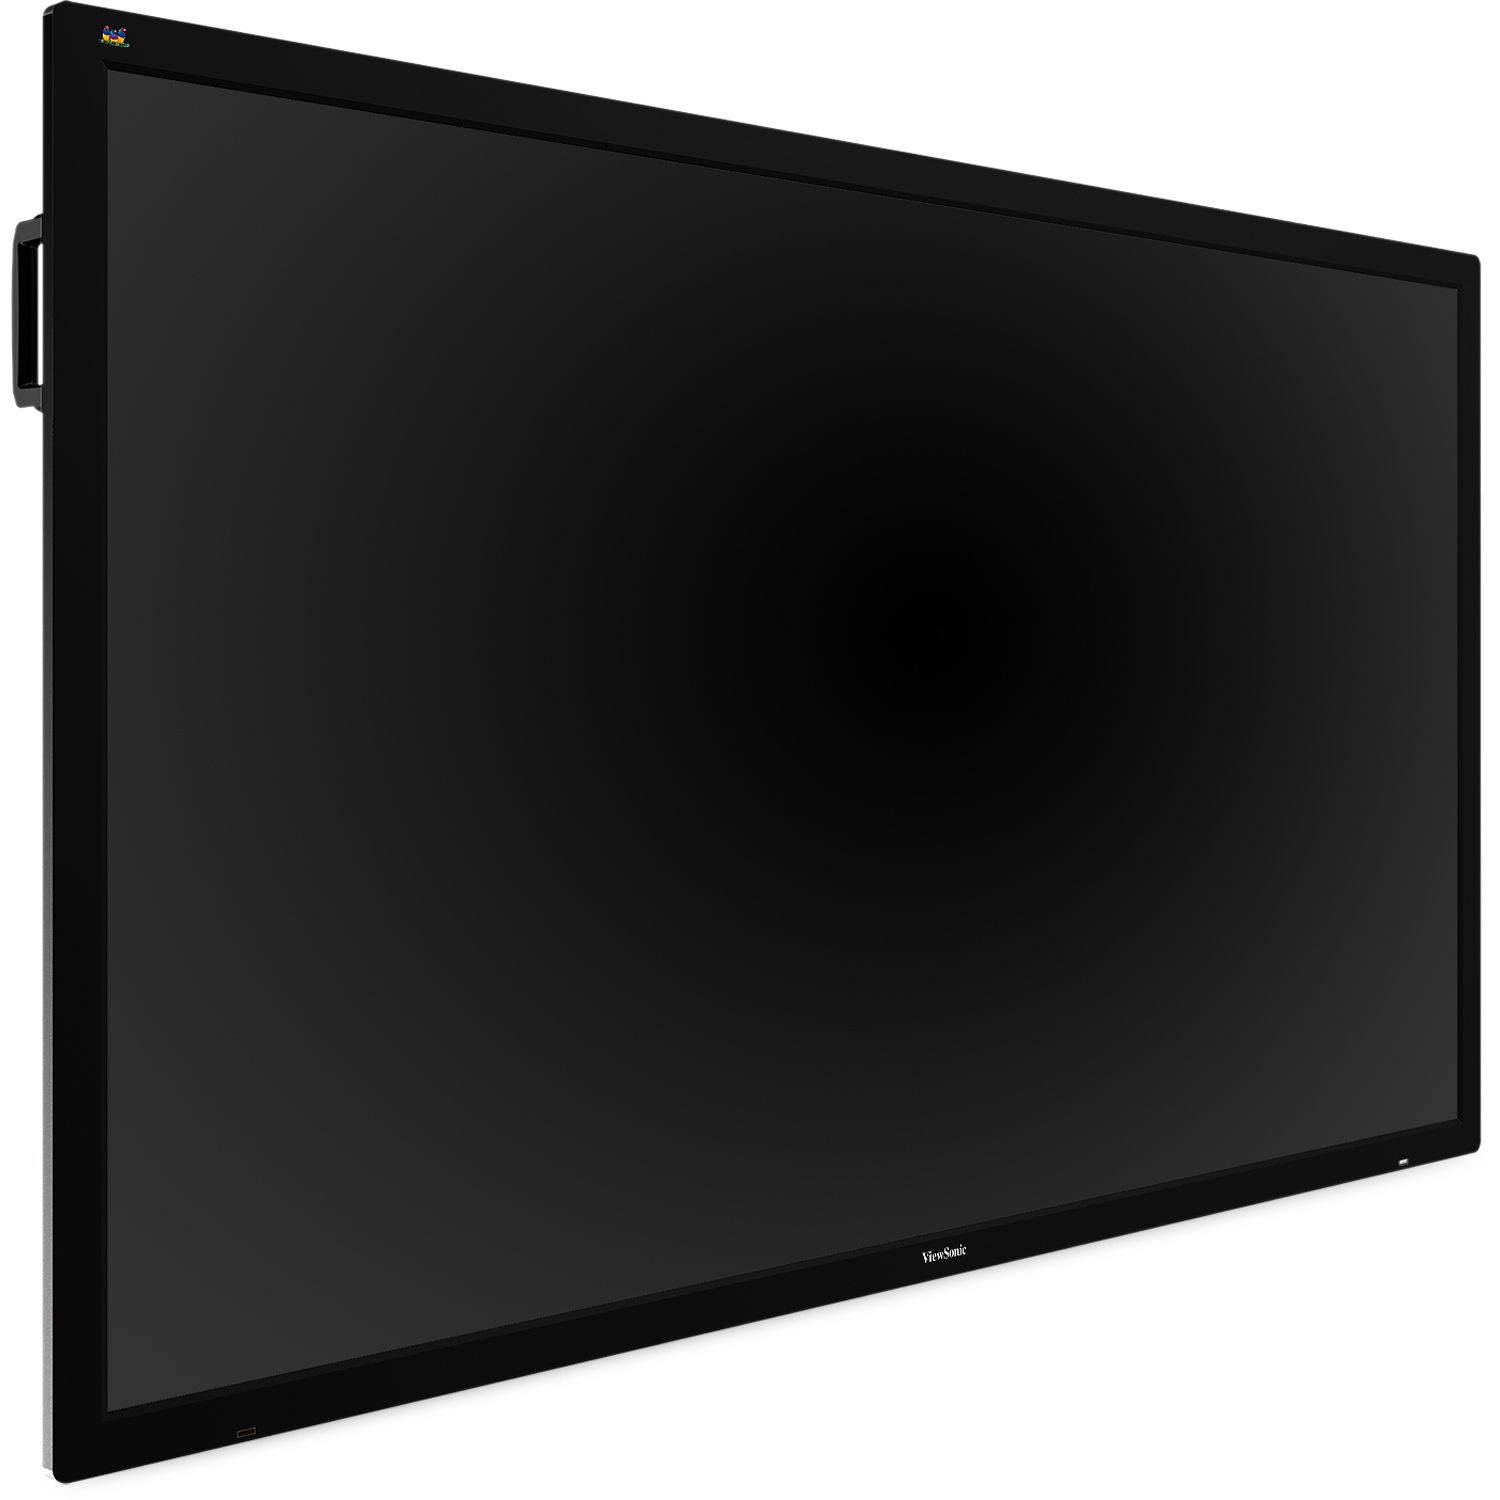 ViewSonic CDE8600-R 86" 16:9 4K Ultra HD Commercial Display Certified Refurbished